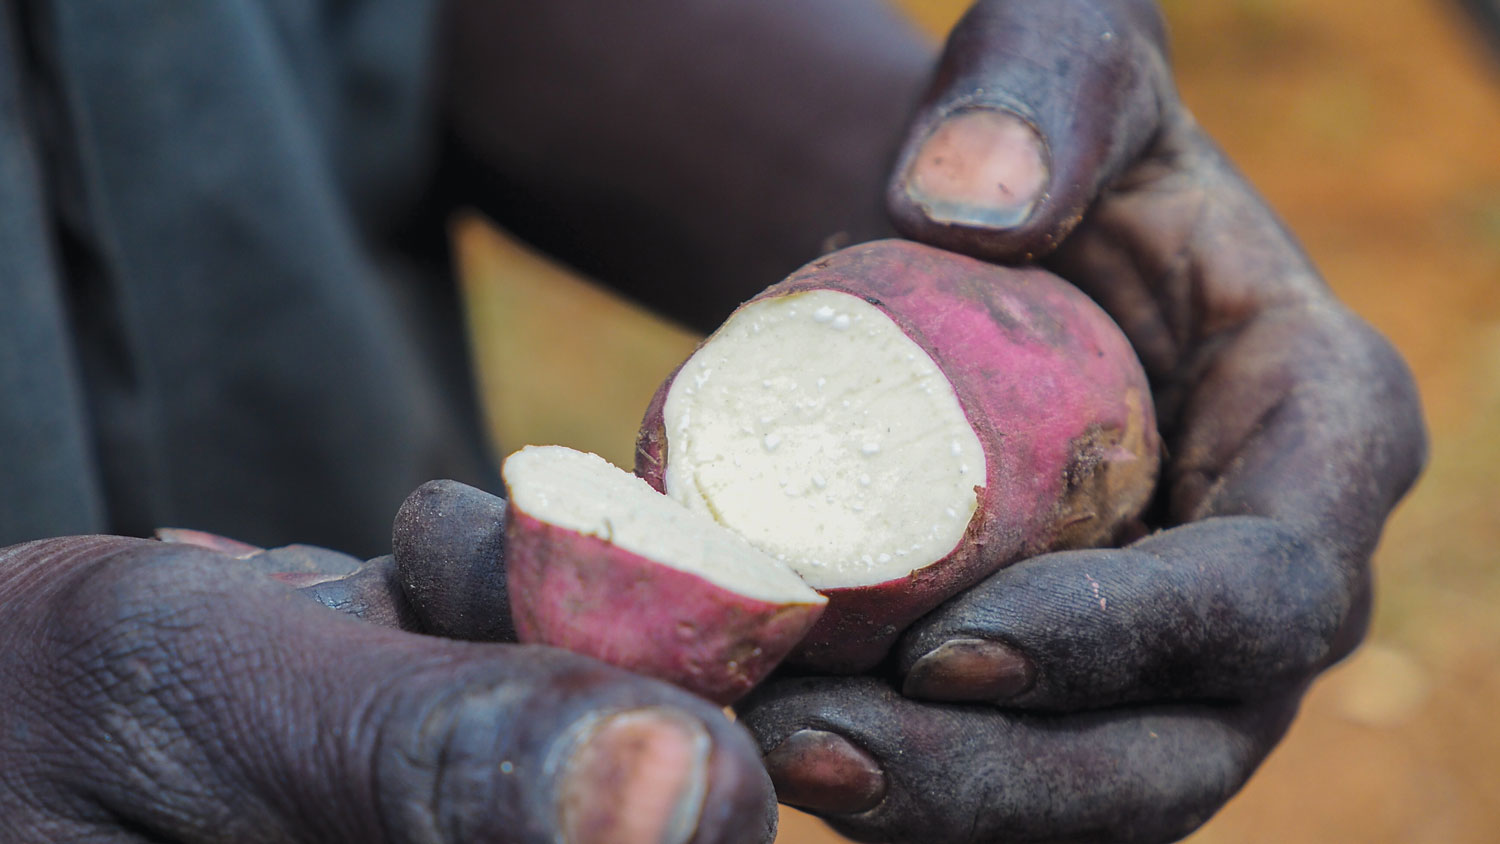 Malinga Emmanuel, a farmer in central Uganda, shows off a white-fleshed sweet potato grown and consumed throughout Uganda and other African countries.